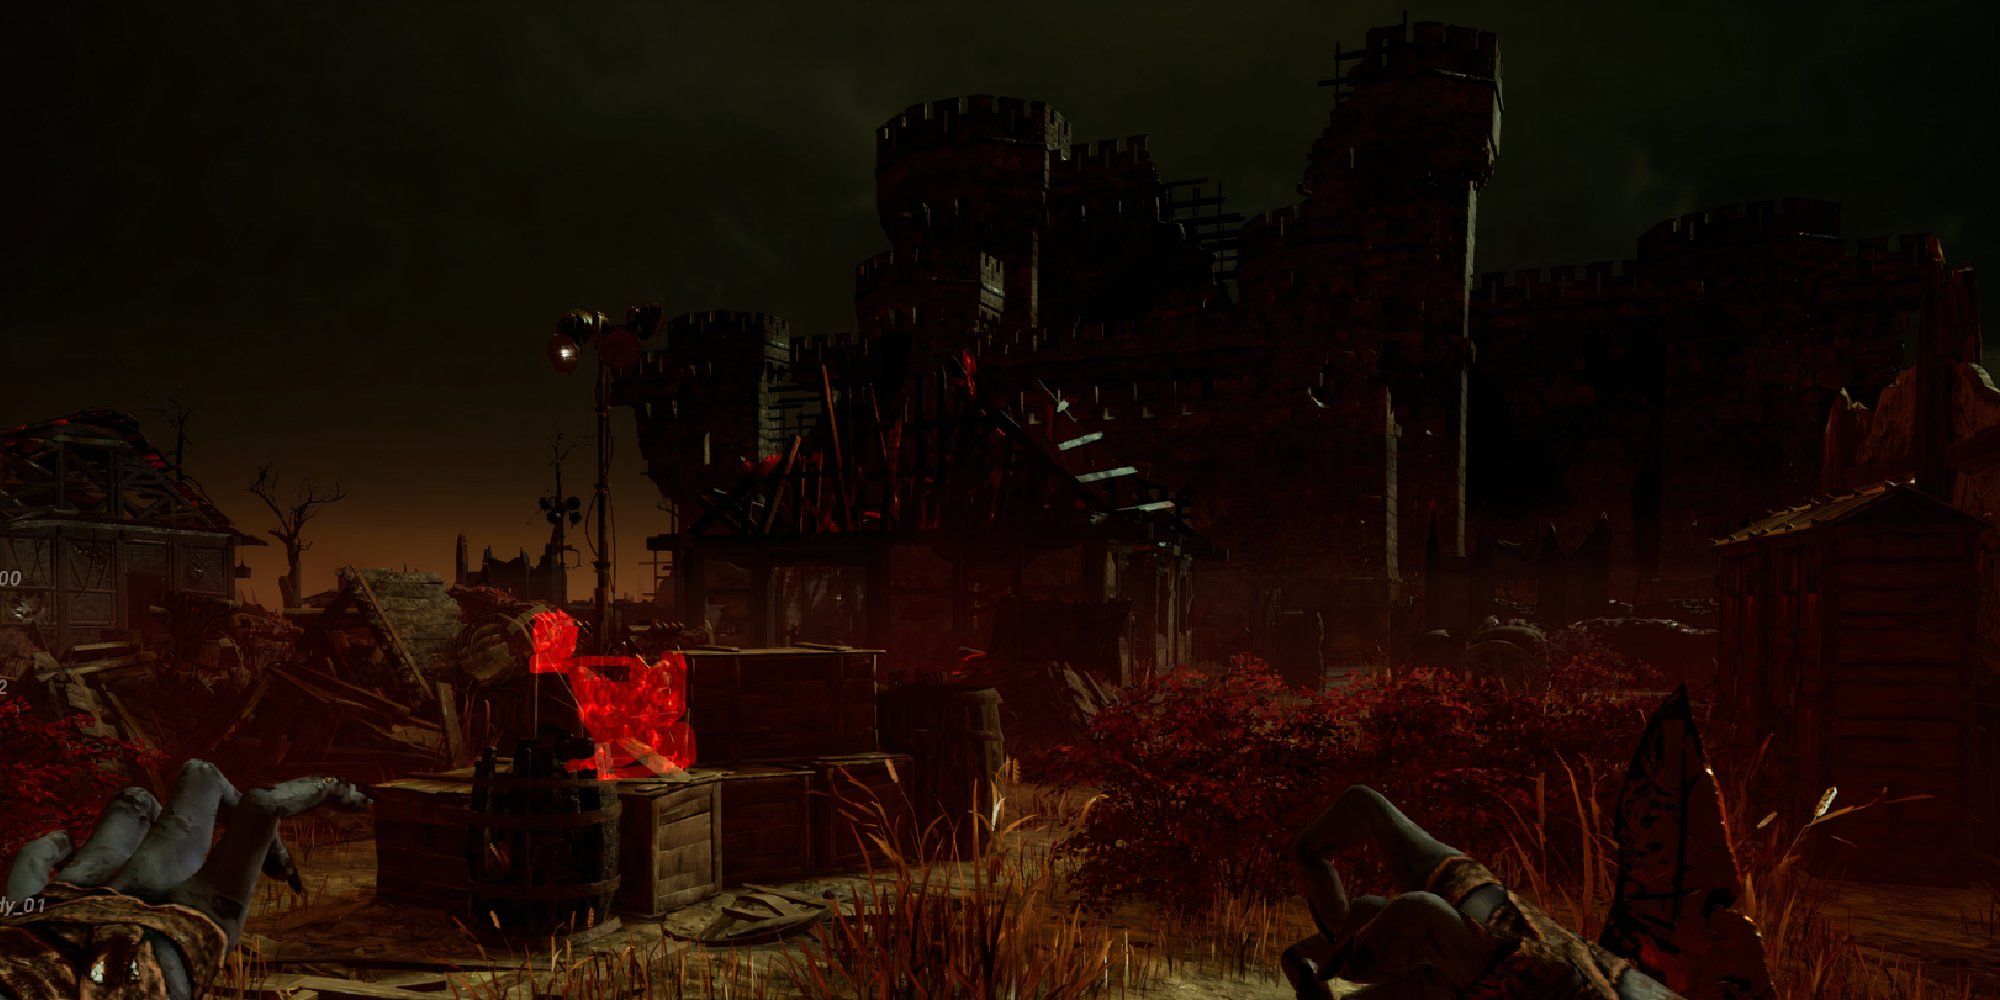 Dead by Daylight Decimated Borgo map, a ruined castle looming in the dark background